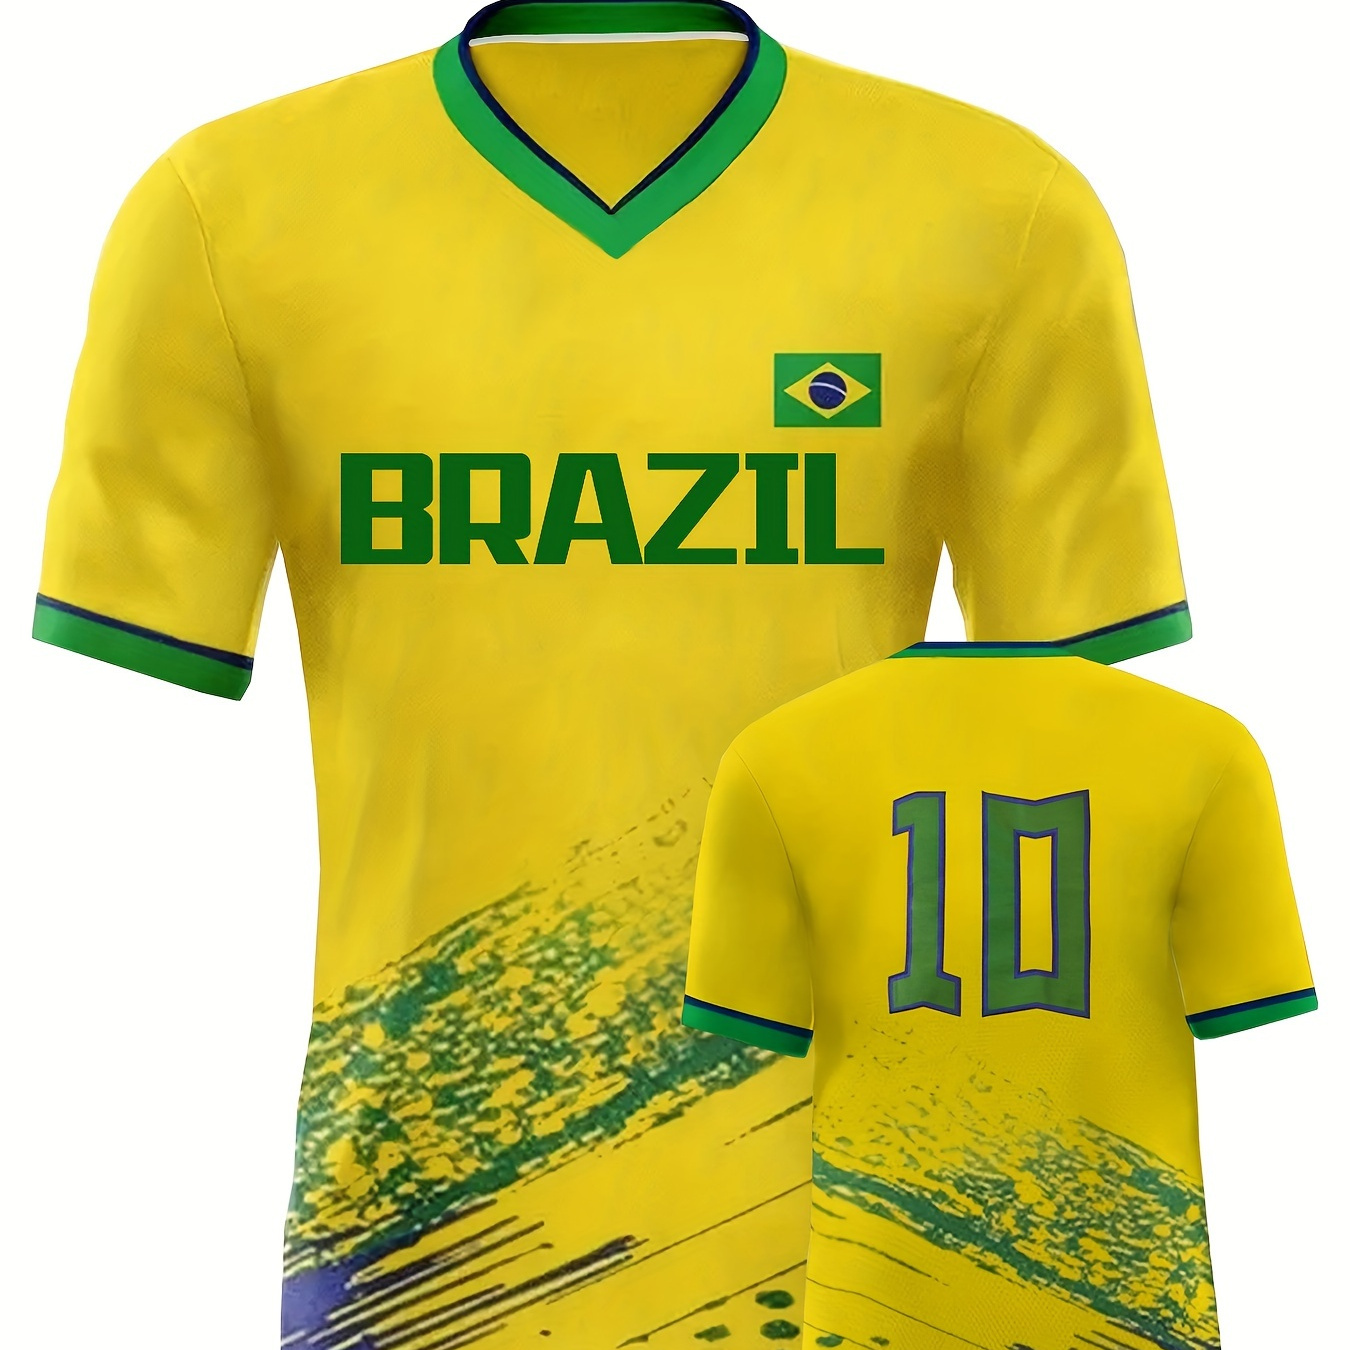 

Men's Brazil Embroidery Athletic Soccer Jersey, Comfortable Sports Top, Casual Training & Everyday Wear